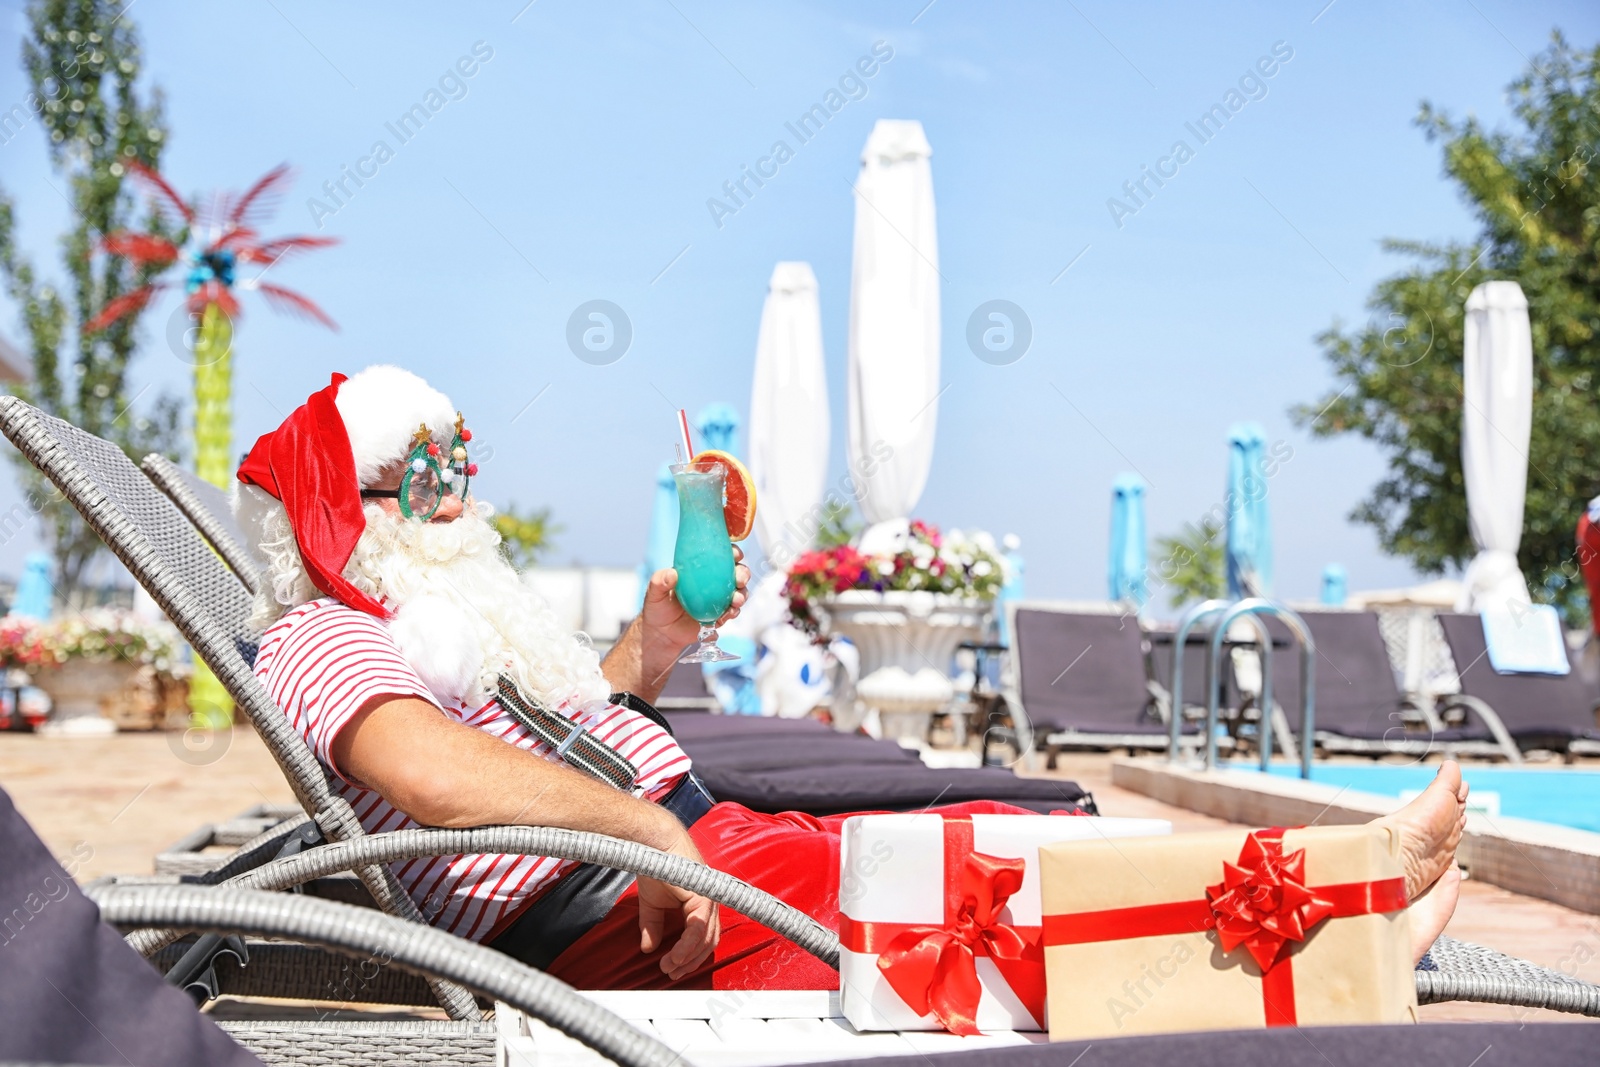 Photo of Authentic Santa Claus with cocktail resting on lounge chair at resort